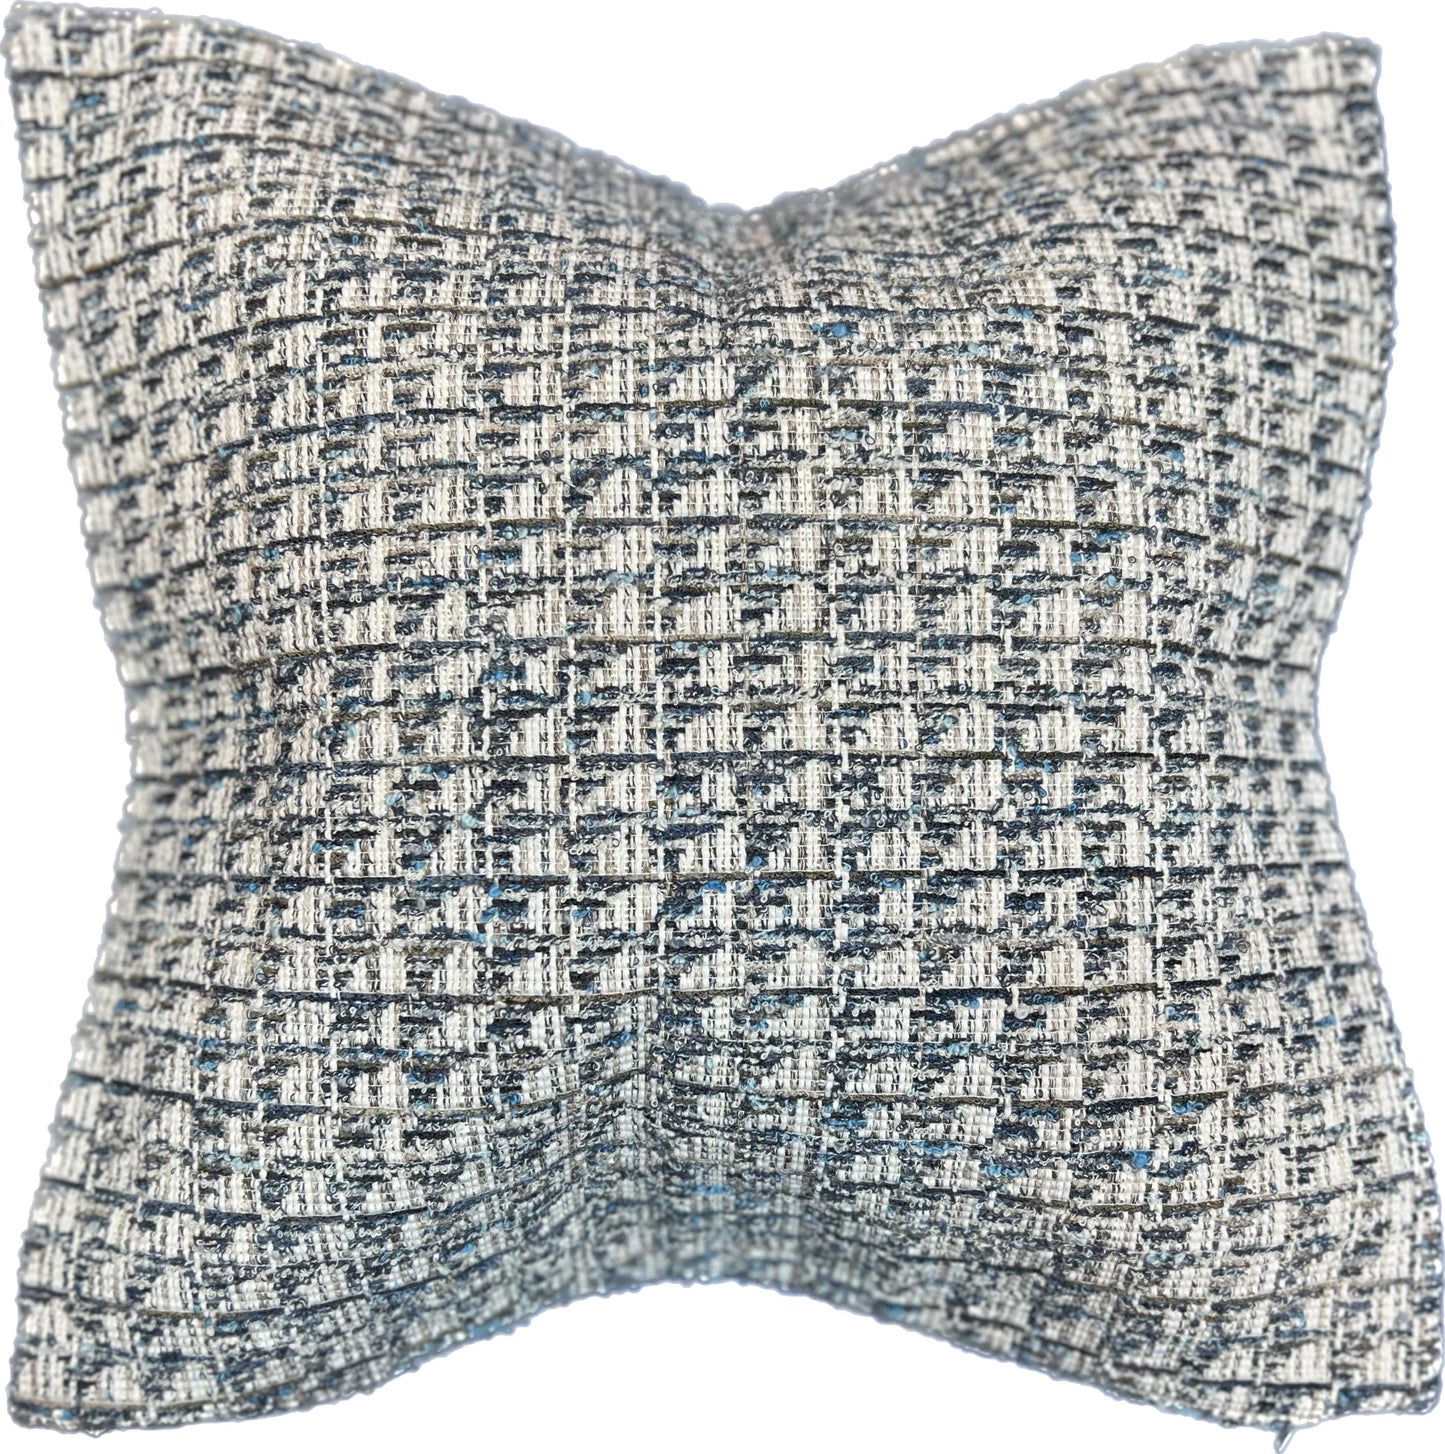 16"x16" Basket Weave Pillow Cover